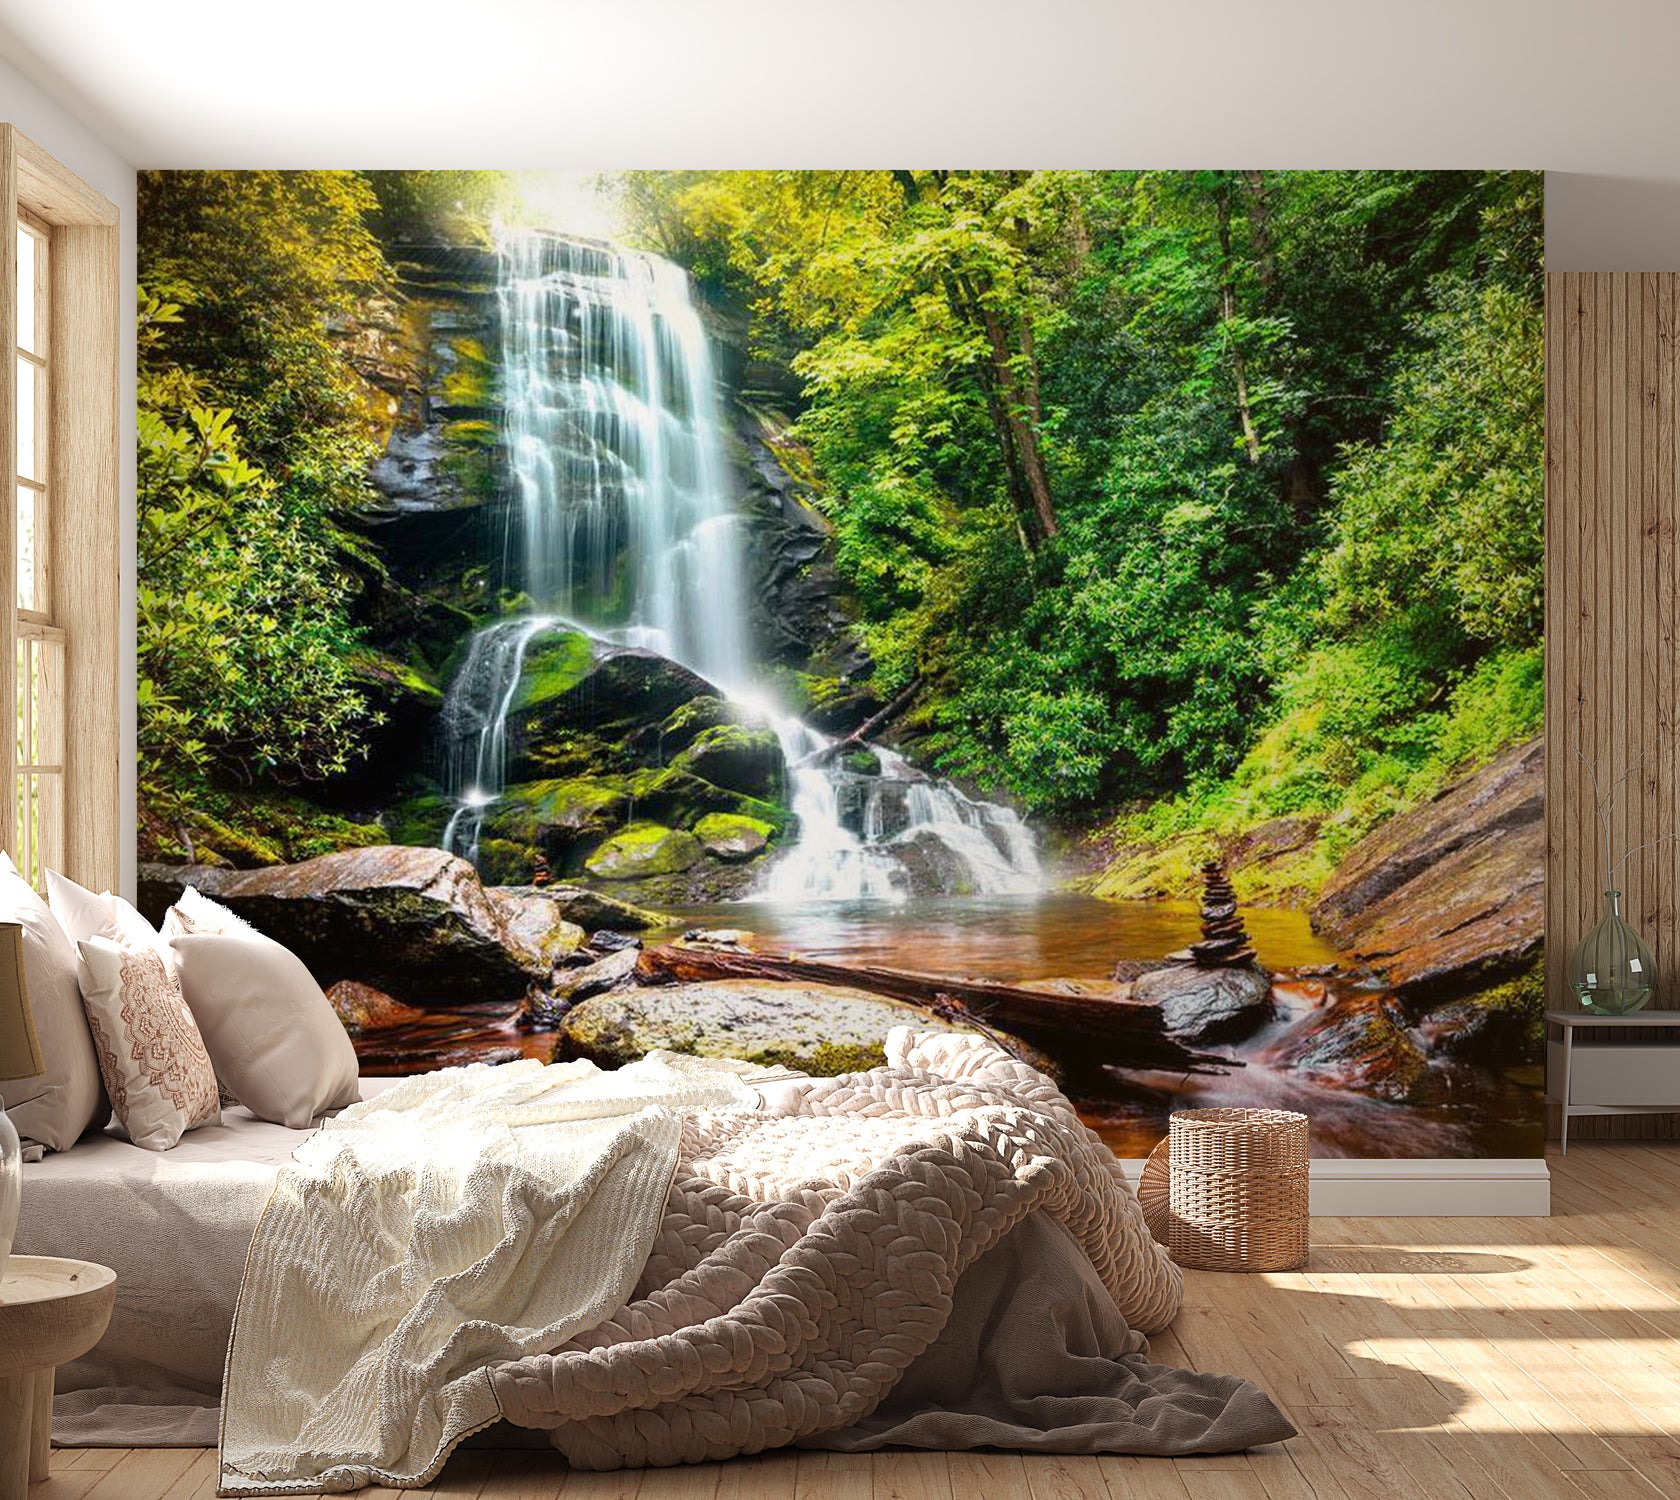 Peel & Stick Nature Wall Mural - Wonder Of Nature - Removable Wall Decals